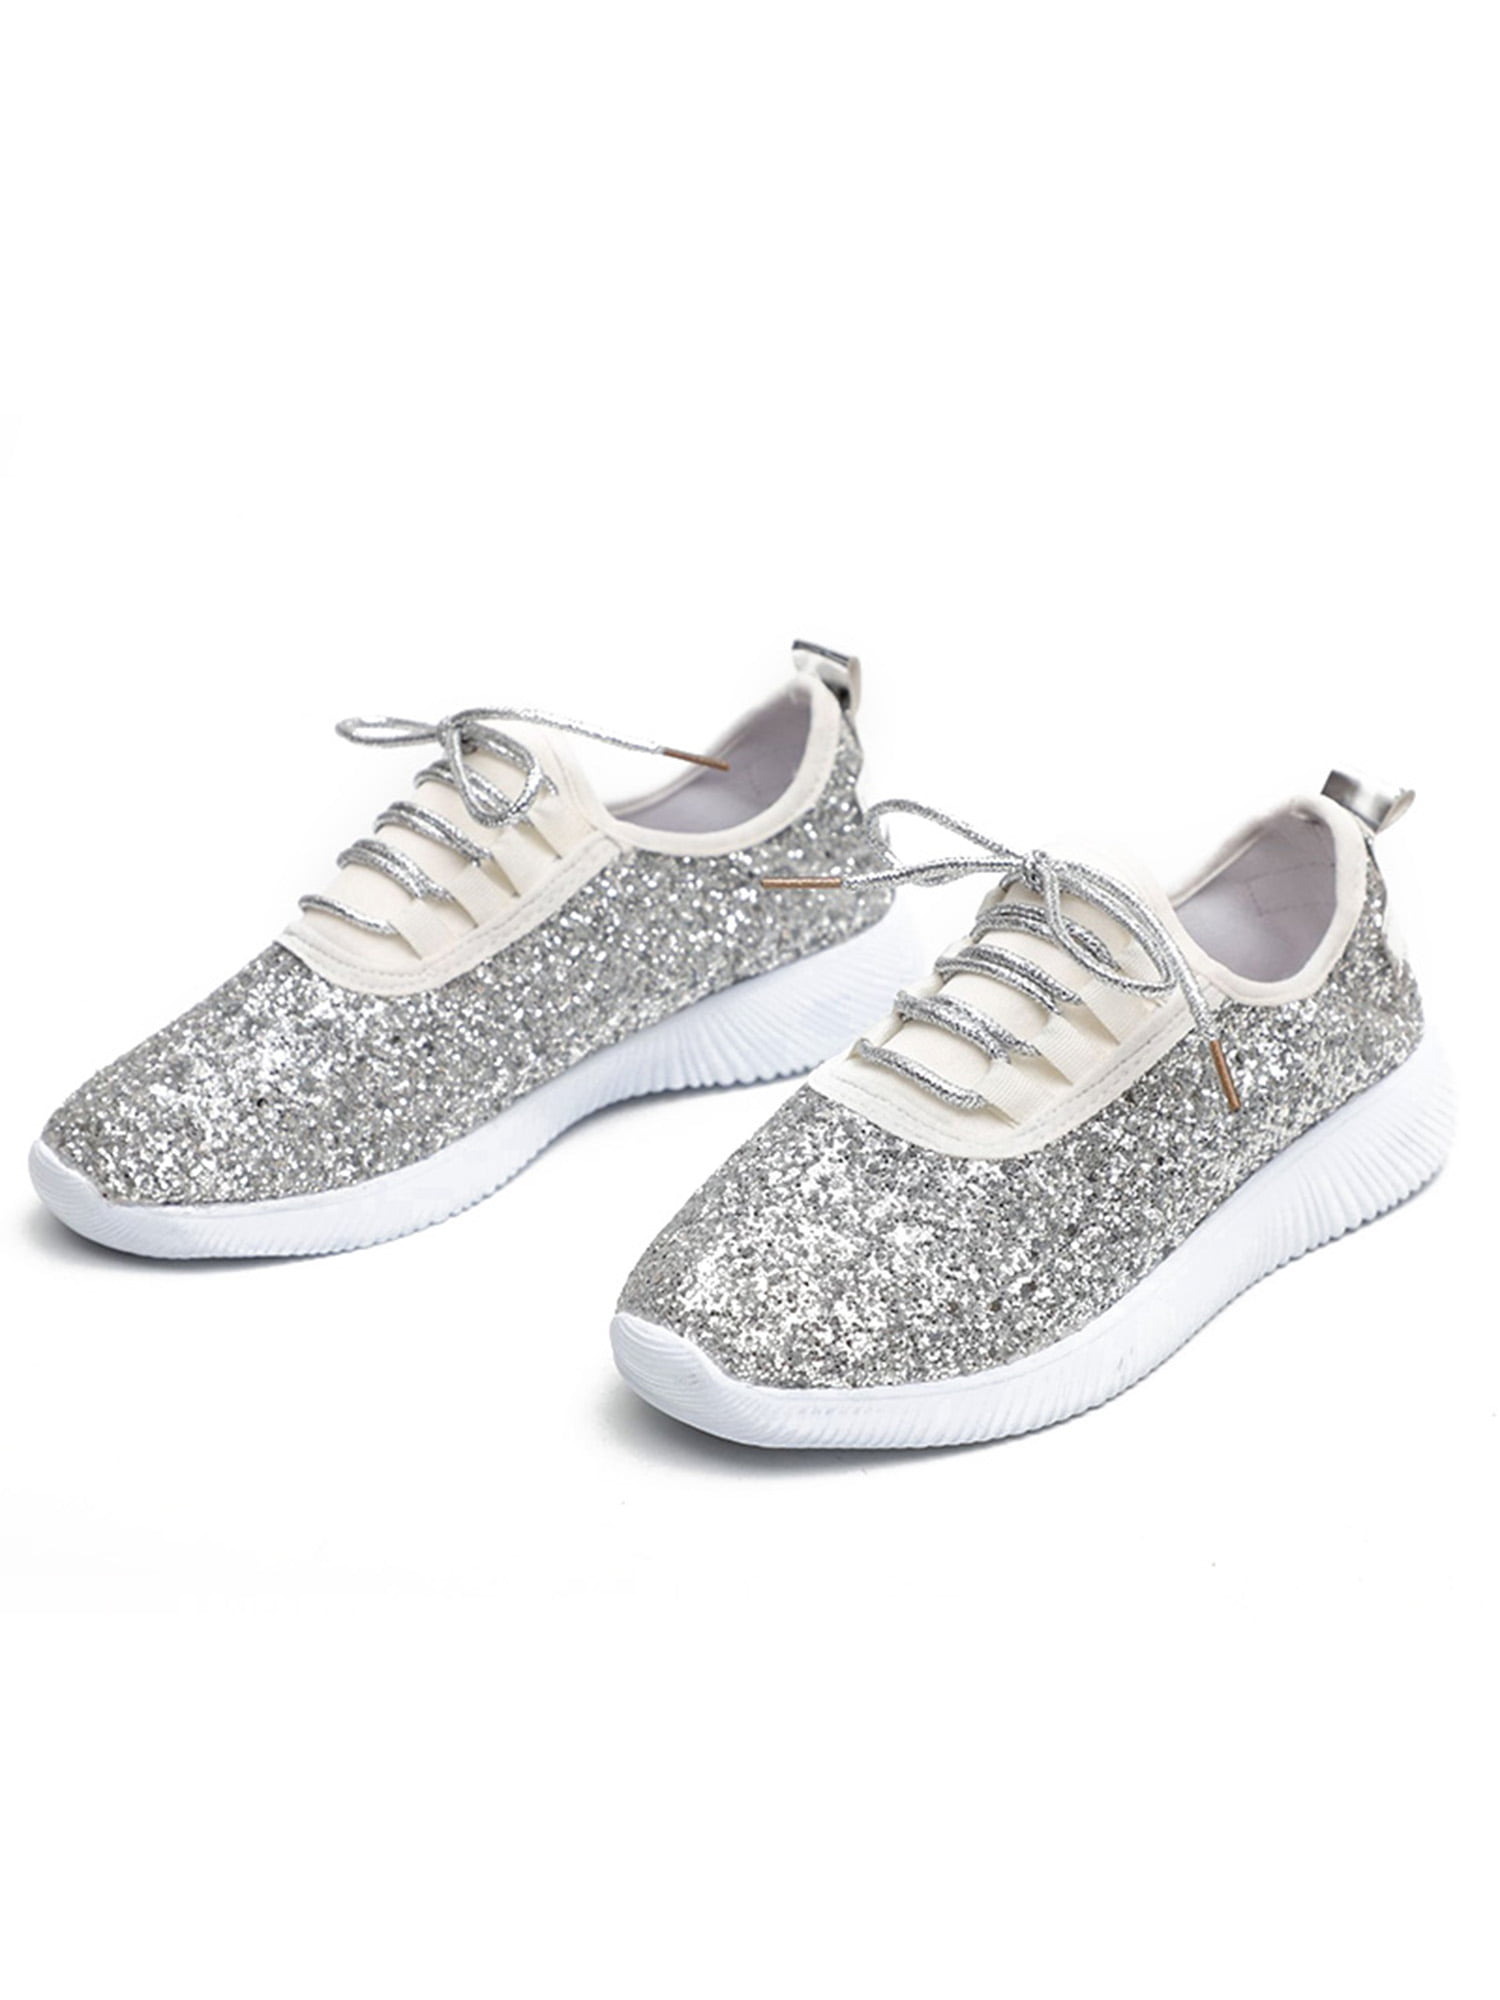 Womens Sequin Glitter Lace Up Fashion Shoes Sport Jogger Smart Athletic Sneakers 